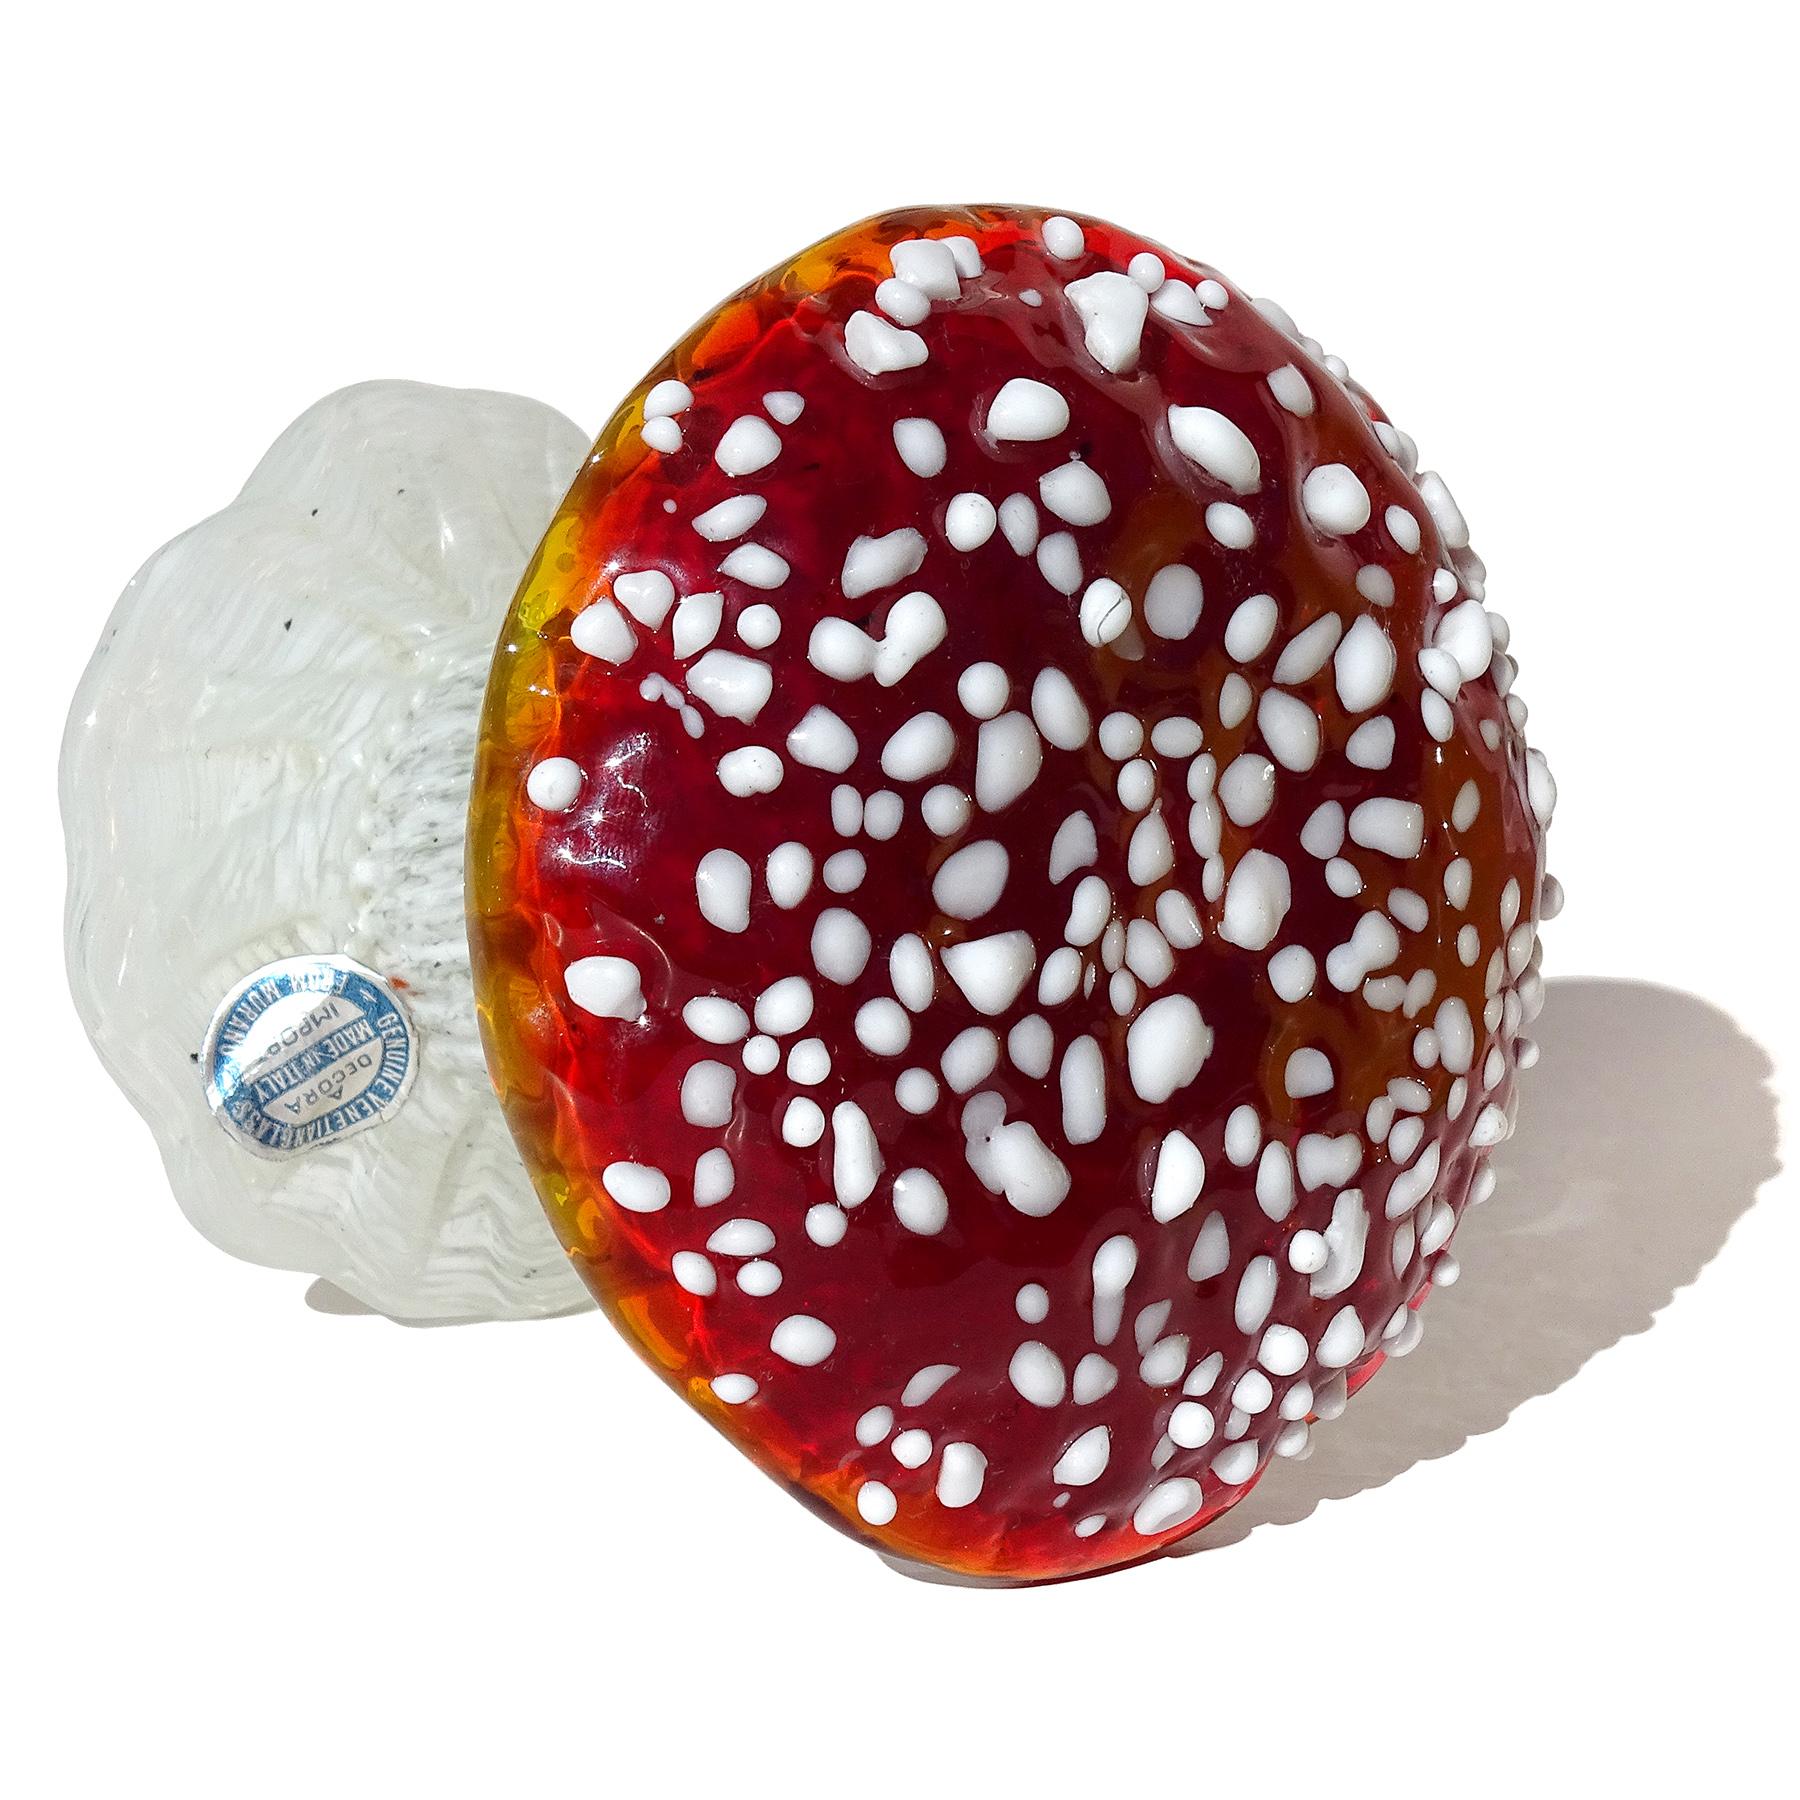 Murano Red White Spot Italian Art Glass Mushroom Toadstool Paperweight Sculpture In Good Condition For Sale In Kissimmee, FL